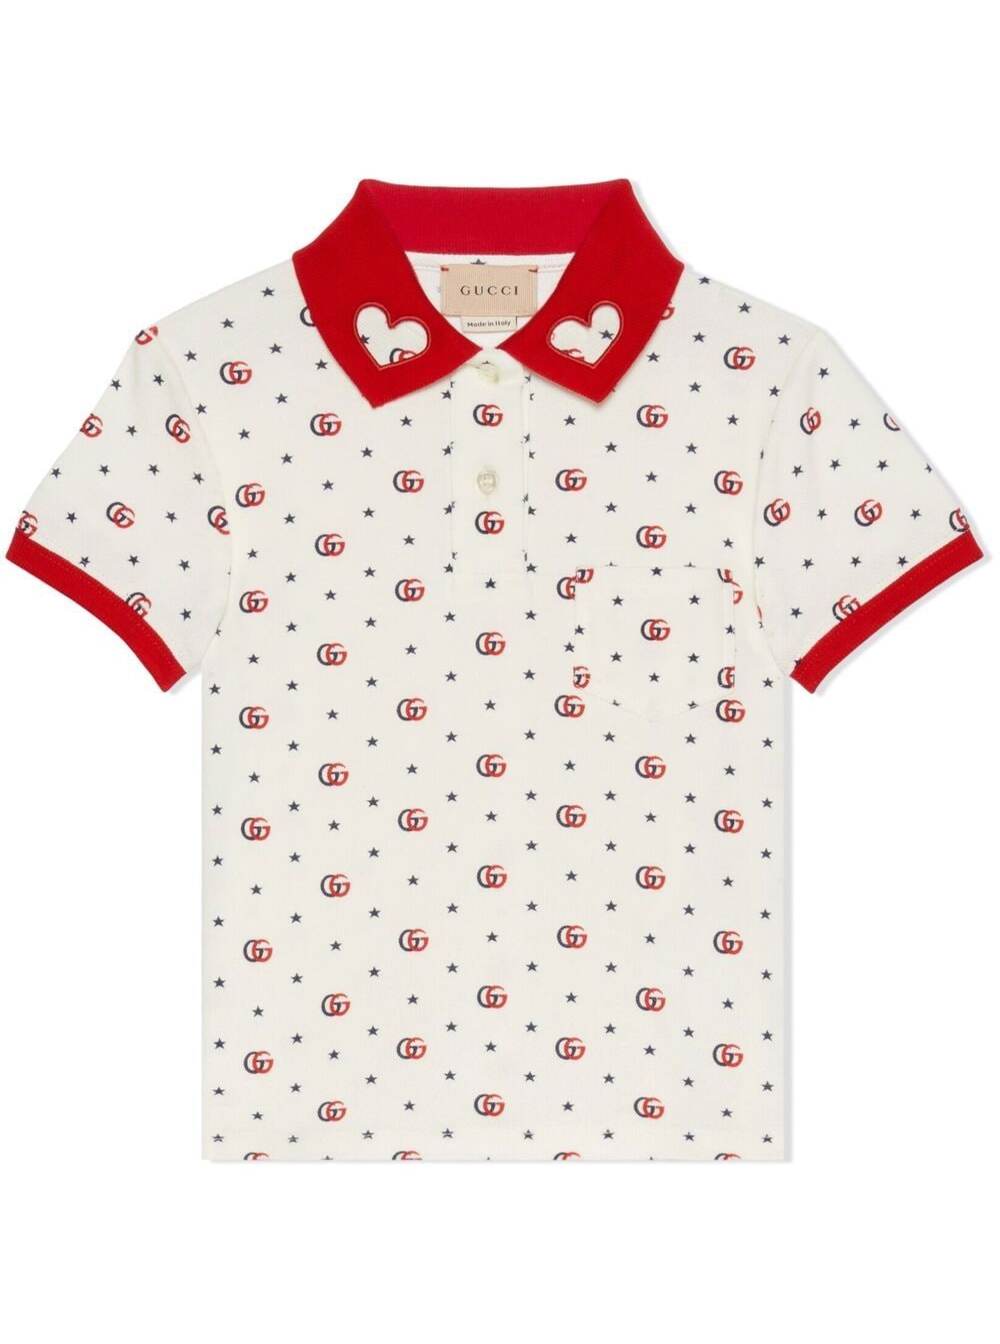 GUCCI WHITE AND RED POLO SHIRT WITH ALL-OVER MONOGRAM PRINT IN COTTON GIRL